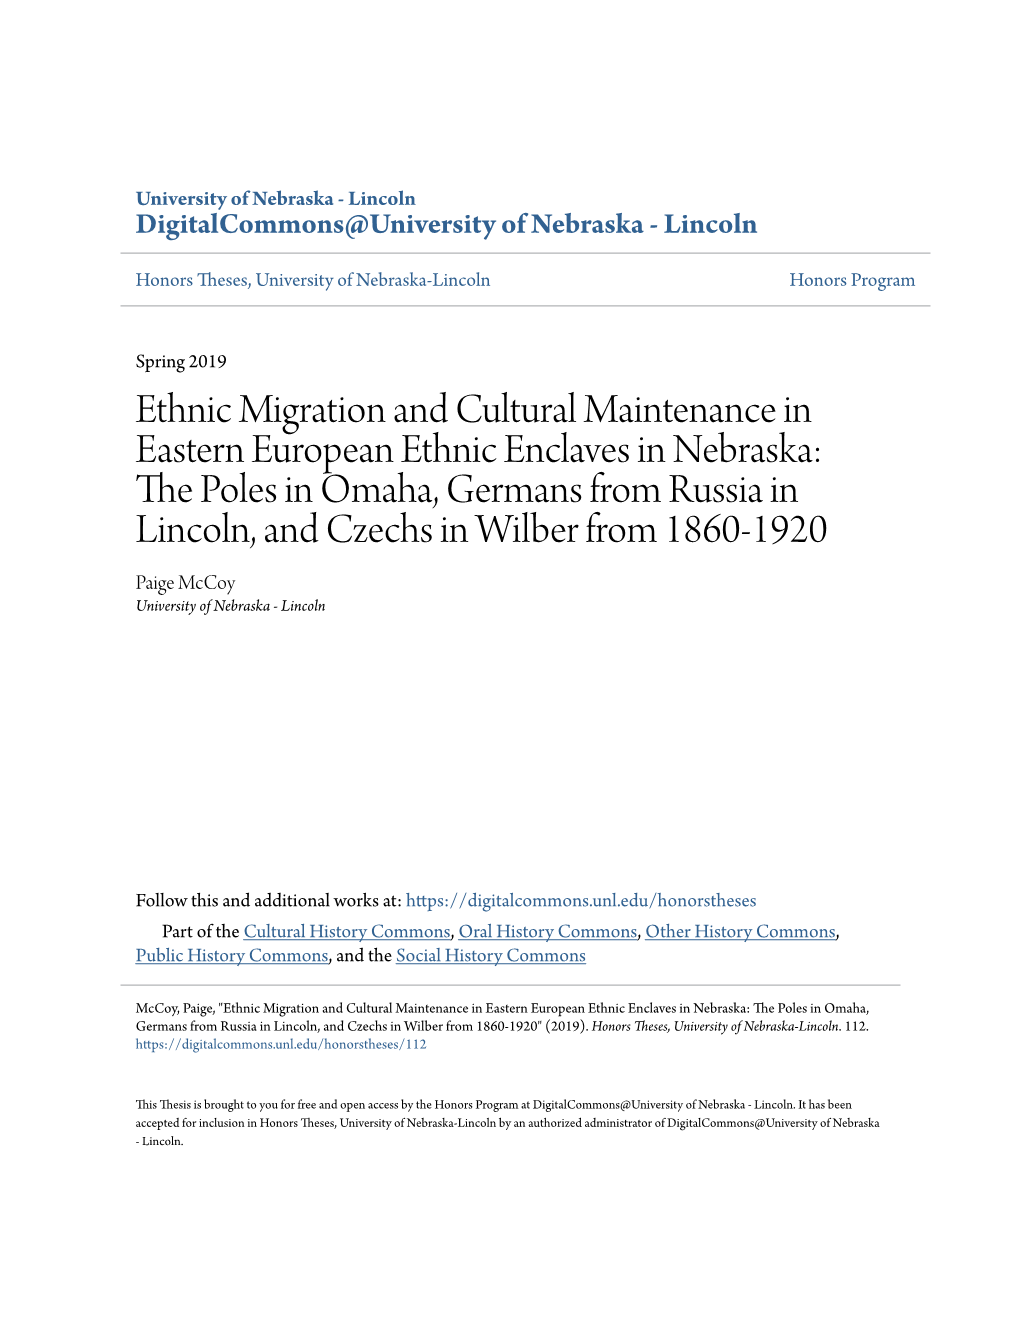 Ethnic Migration and Cultural Maintenance in Eastern European